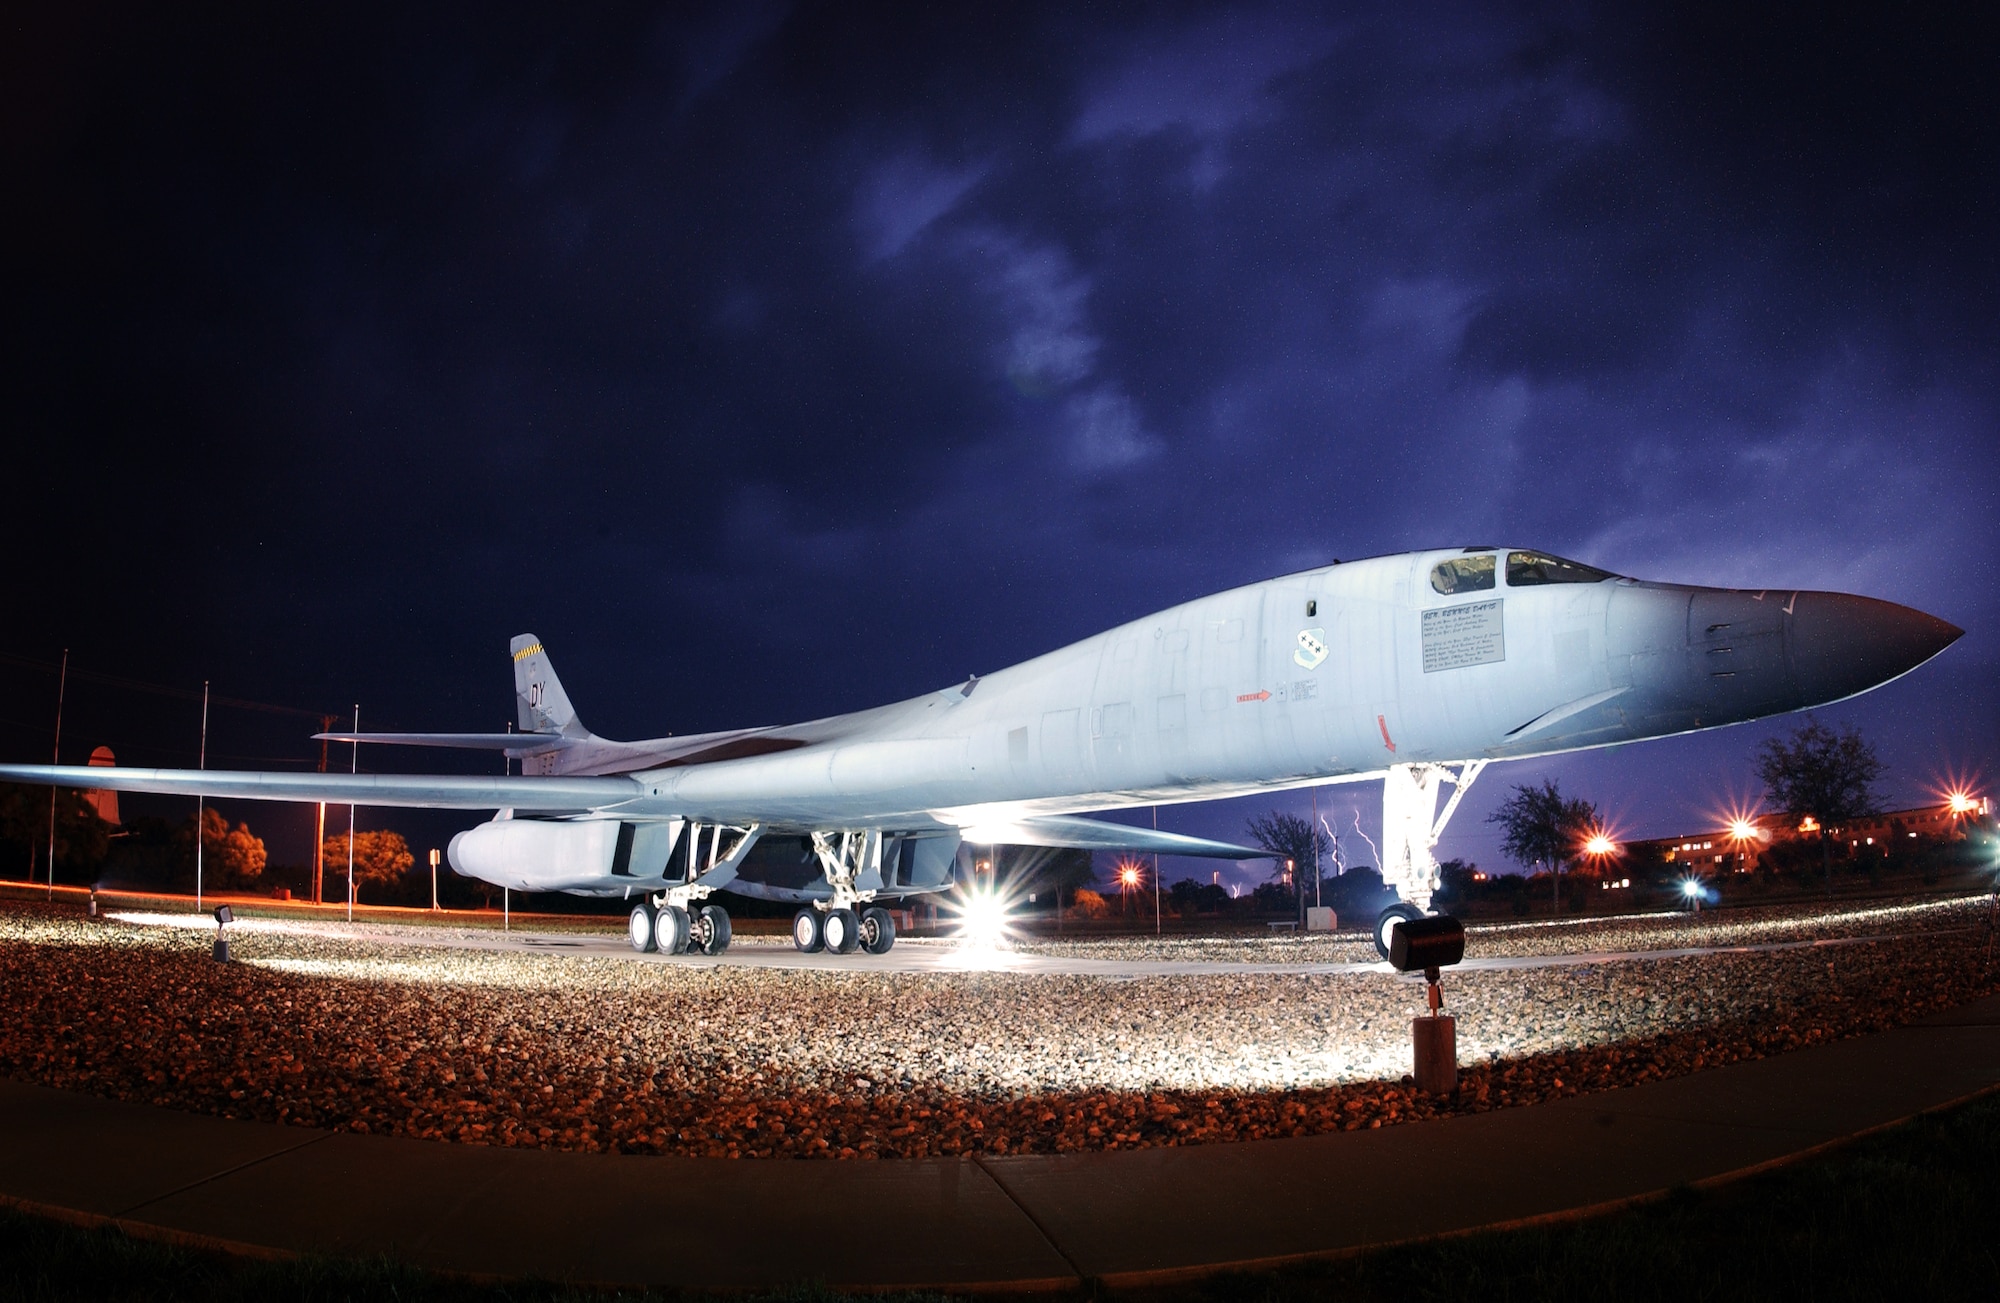 DYESS AIR FORCE BASE, Texas -- The first operational B-1B Lancer in the Air Force, also known as the Star of Abilene, sits on display here.  The base celebrated the bomber's 20th anniversary June 29.  (U.S. Air Force photo by Airman 1st Class Alan Garrison)